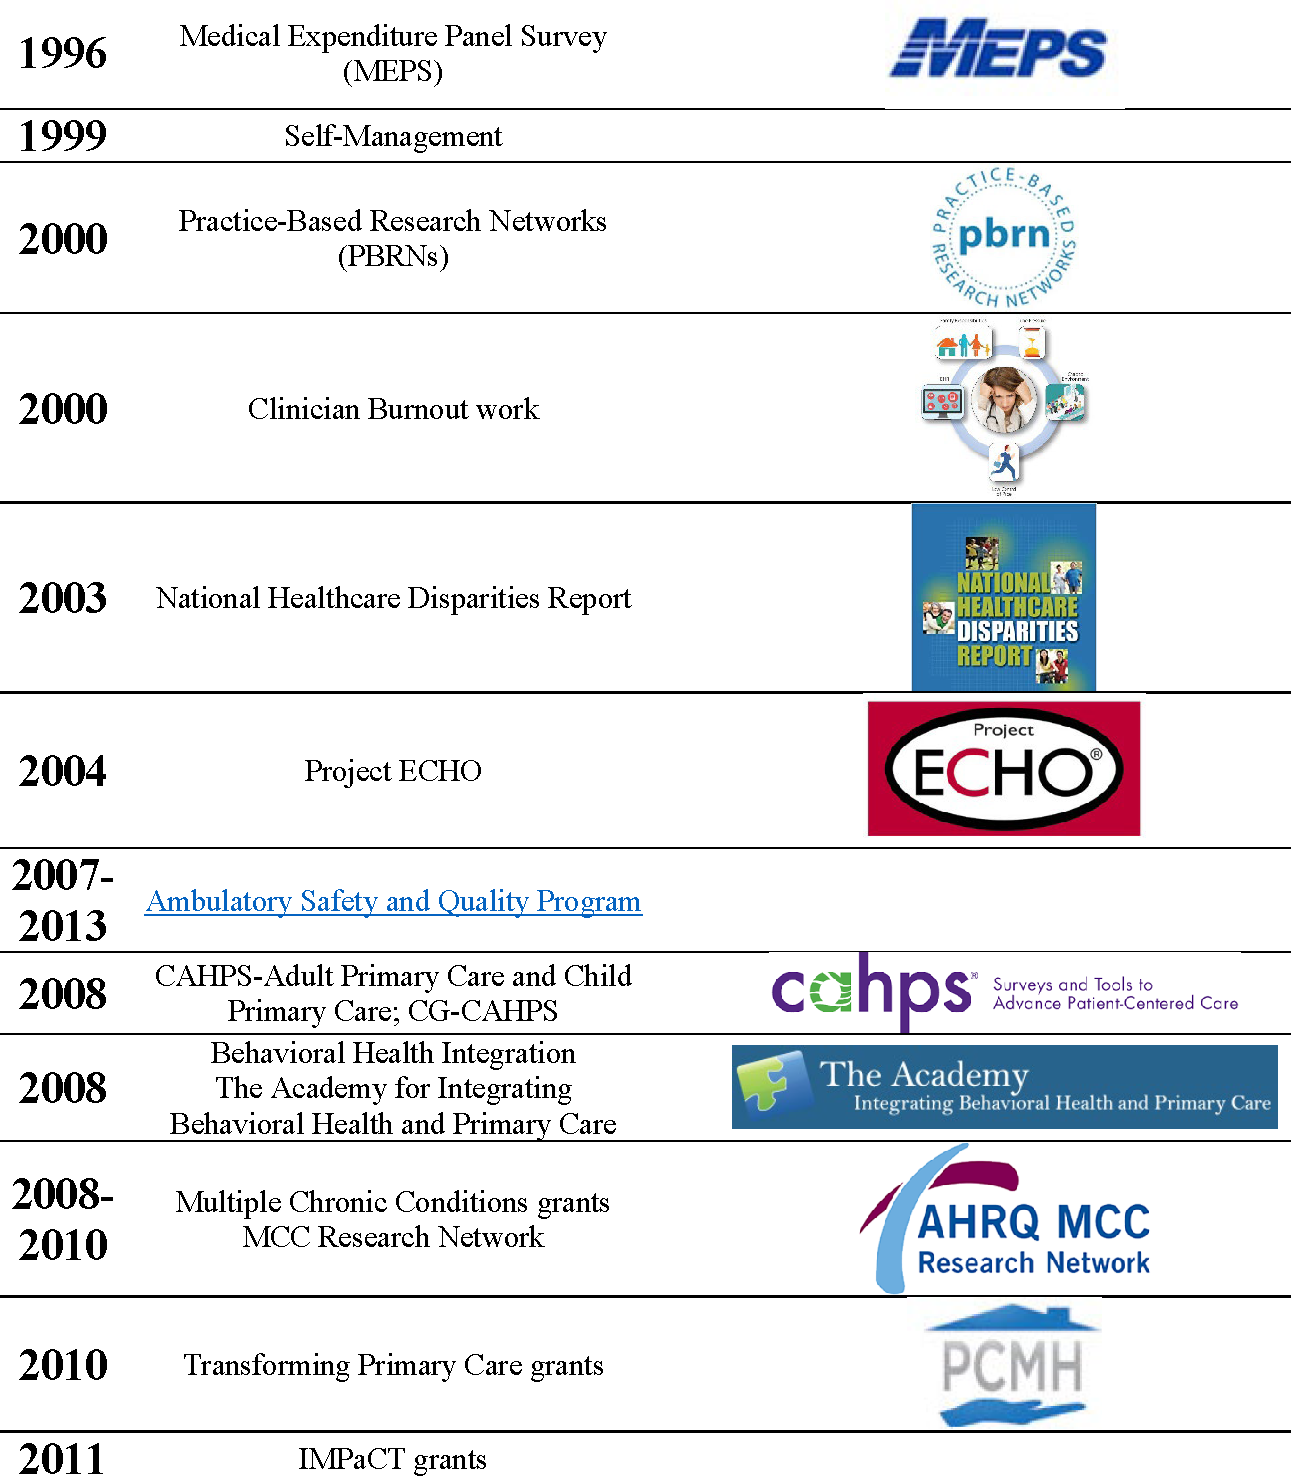 1996 Medical Expenditure Panel Survey (MEPS). 1999 Self-Management. 2000 Practice-Based Research Networks (PBRNs). Clinician Burnout work. 2003 National Healthcare Disparities Report. 2004 Project ECHO. 2007-2013 Ambulatory Safety and Quality Program. 2008 CAHPS-Adult Primary Care and Child Primary Care; CG-CAHPS. 2008 Behavioral Health Integration The Academy for Integrating Behavioral Health and Primary Care. 2008-2010 Multiple Chronic Conditions grants, MCC Research Network. 2010 Transforming Primary Care grants. 2011 IMPaCT grants